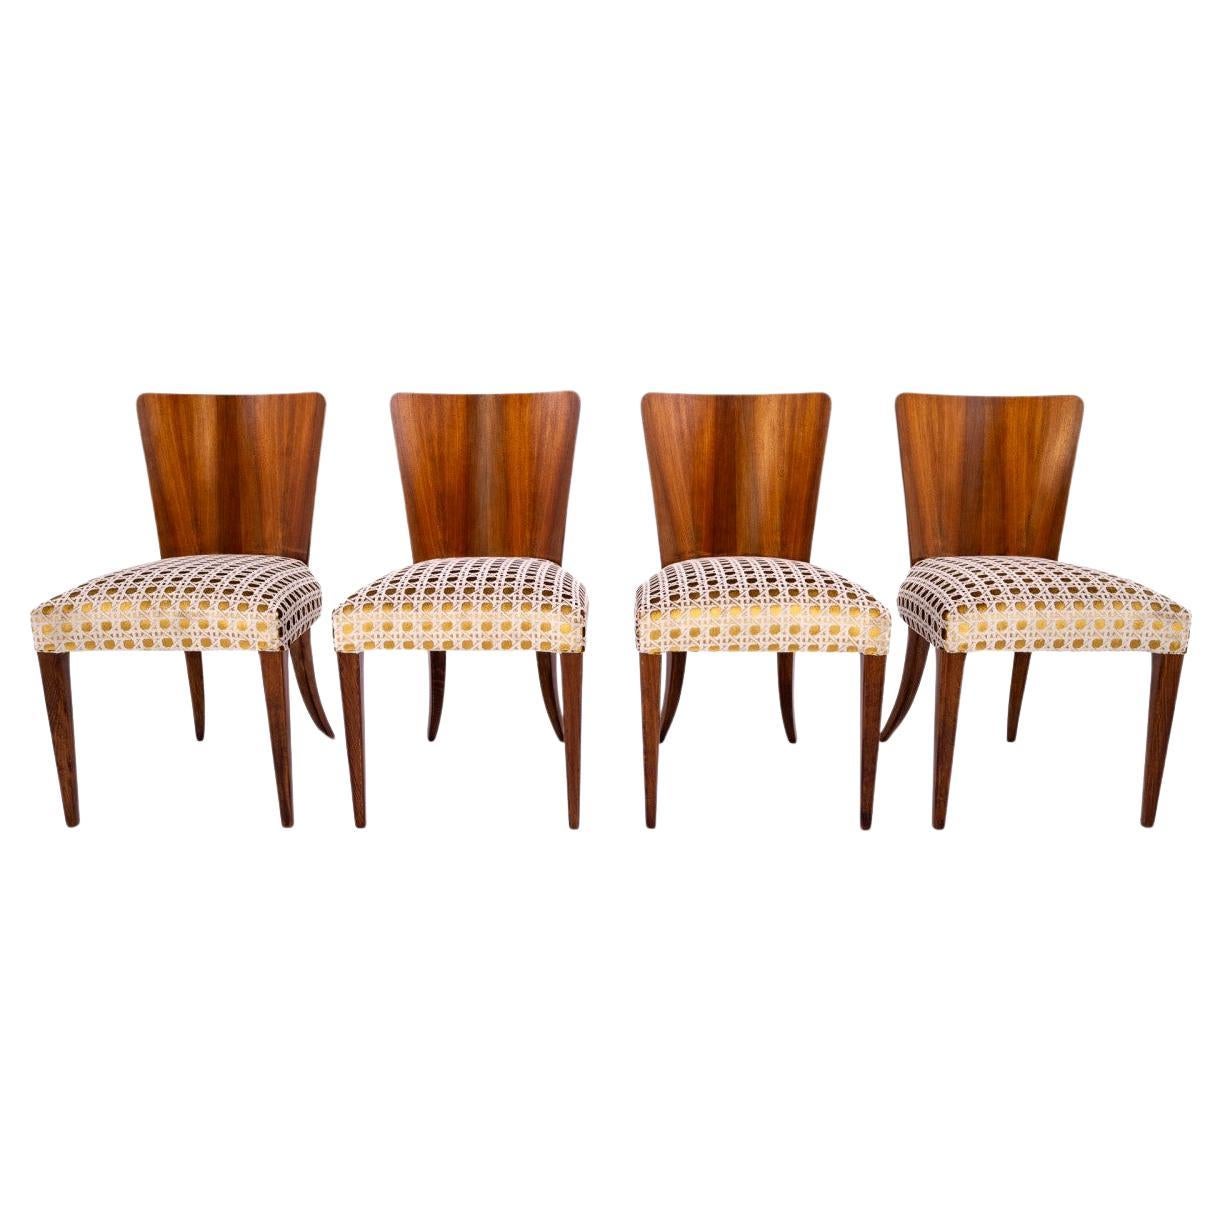 Set of 4 chairs designed by Halabala, 1930s For Sale